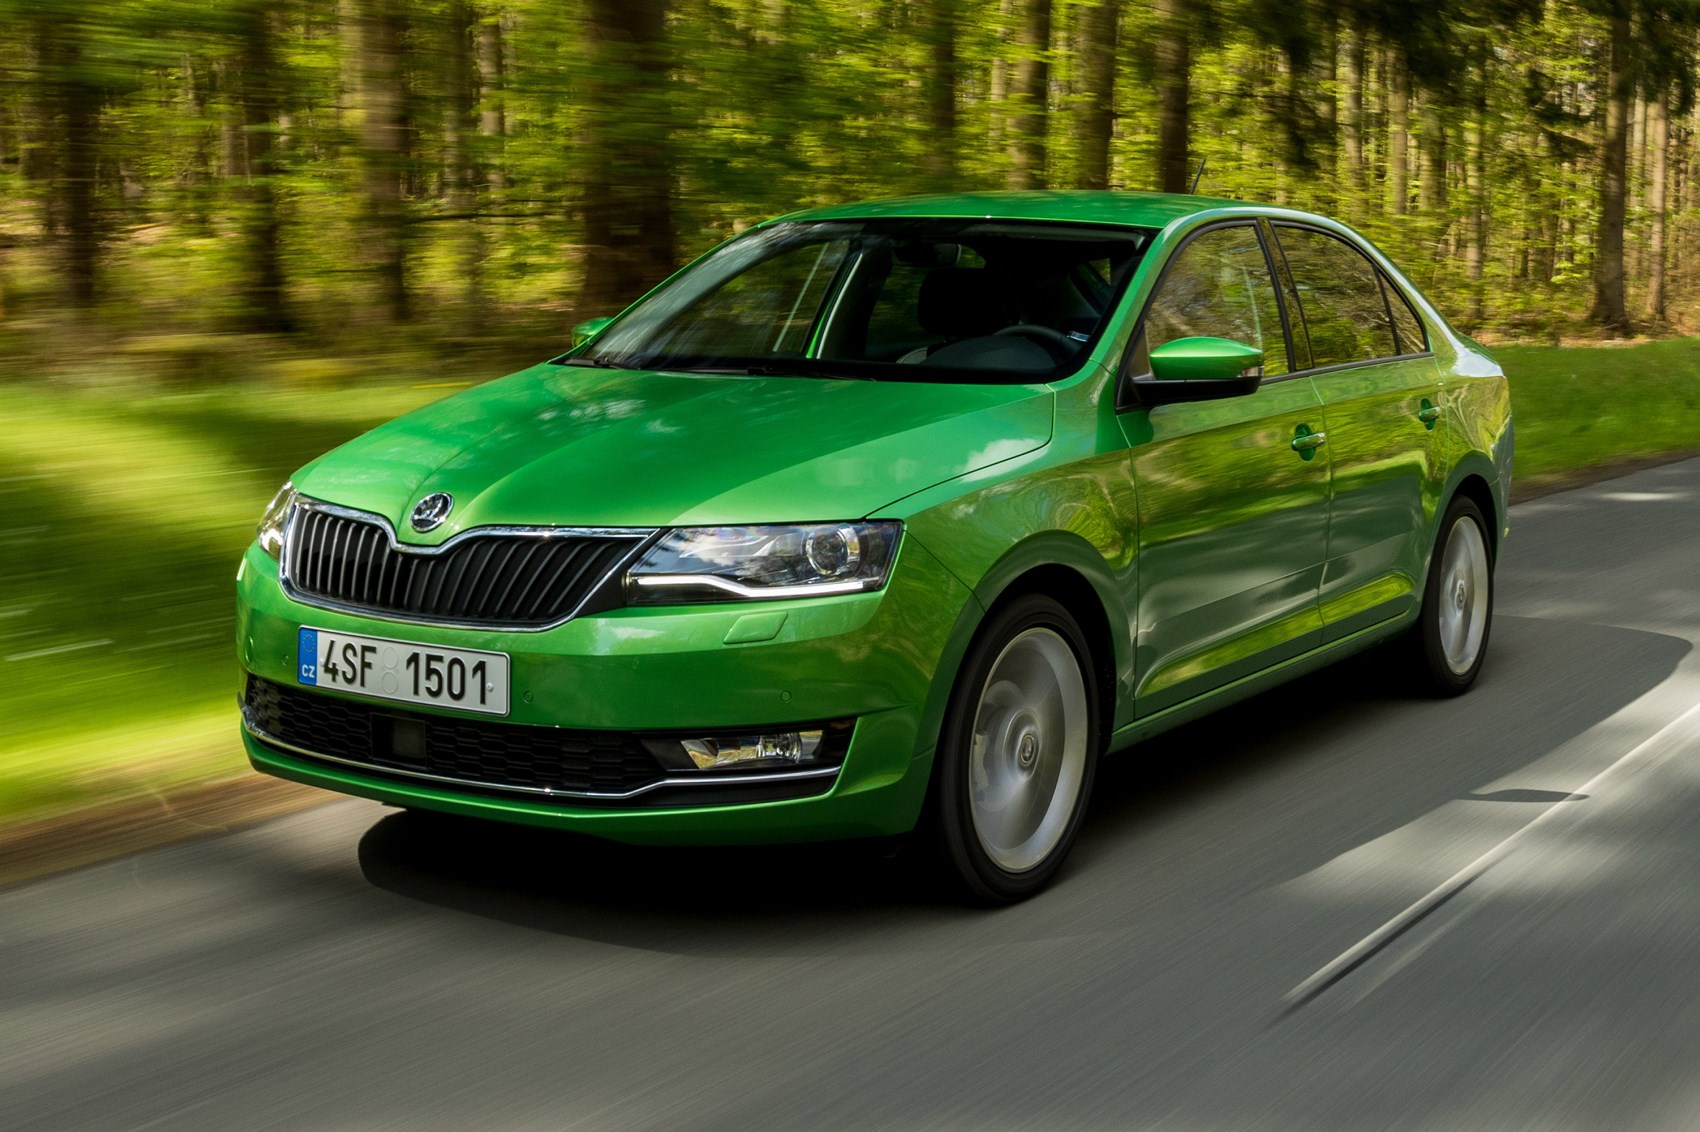 Skoda Rapid review - The Interiors and features